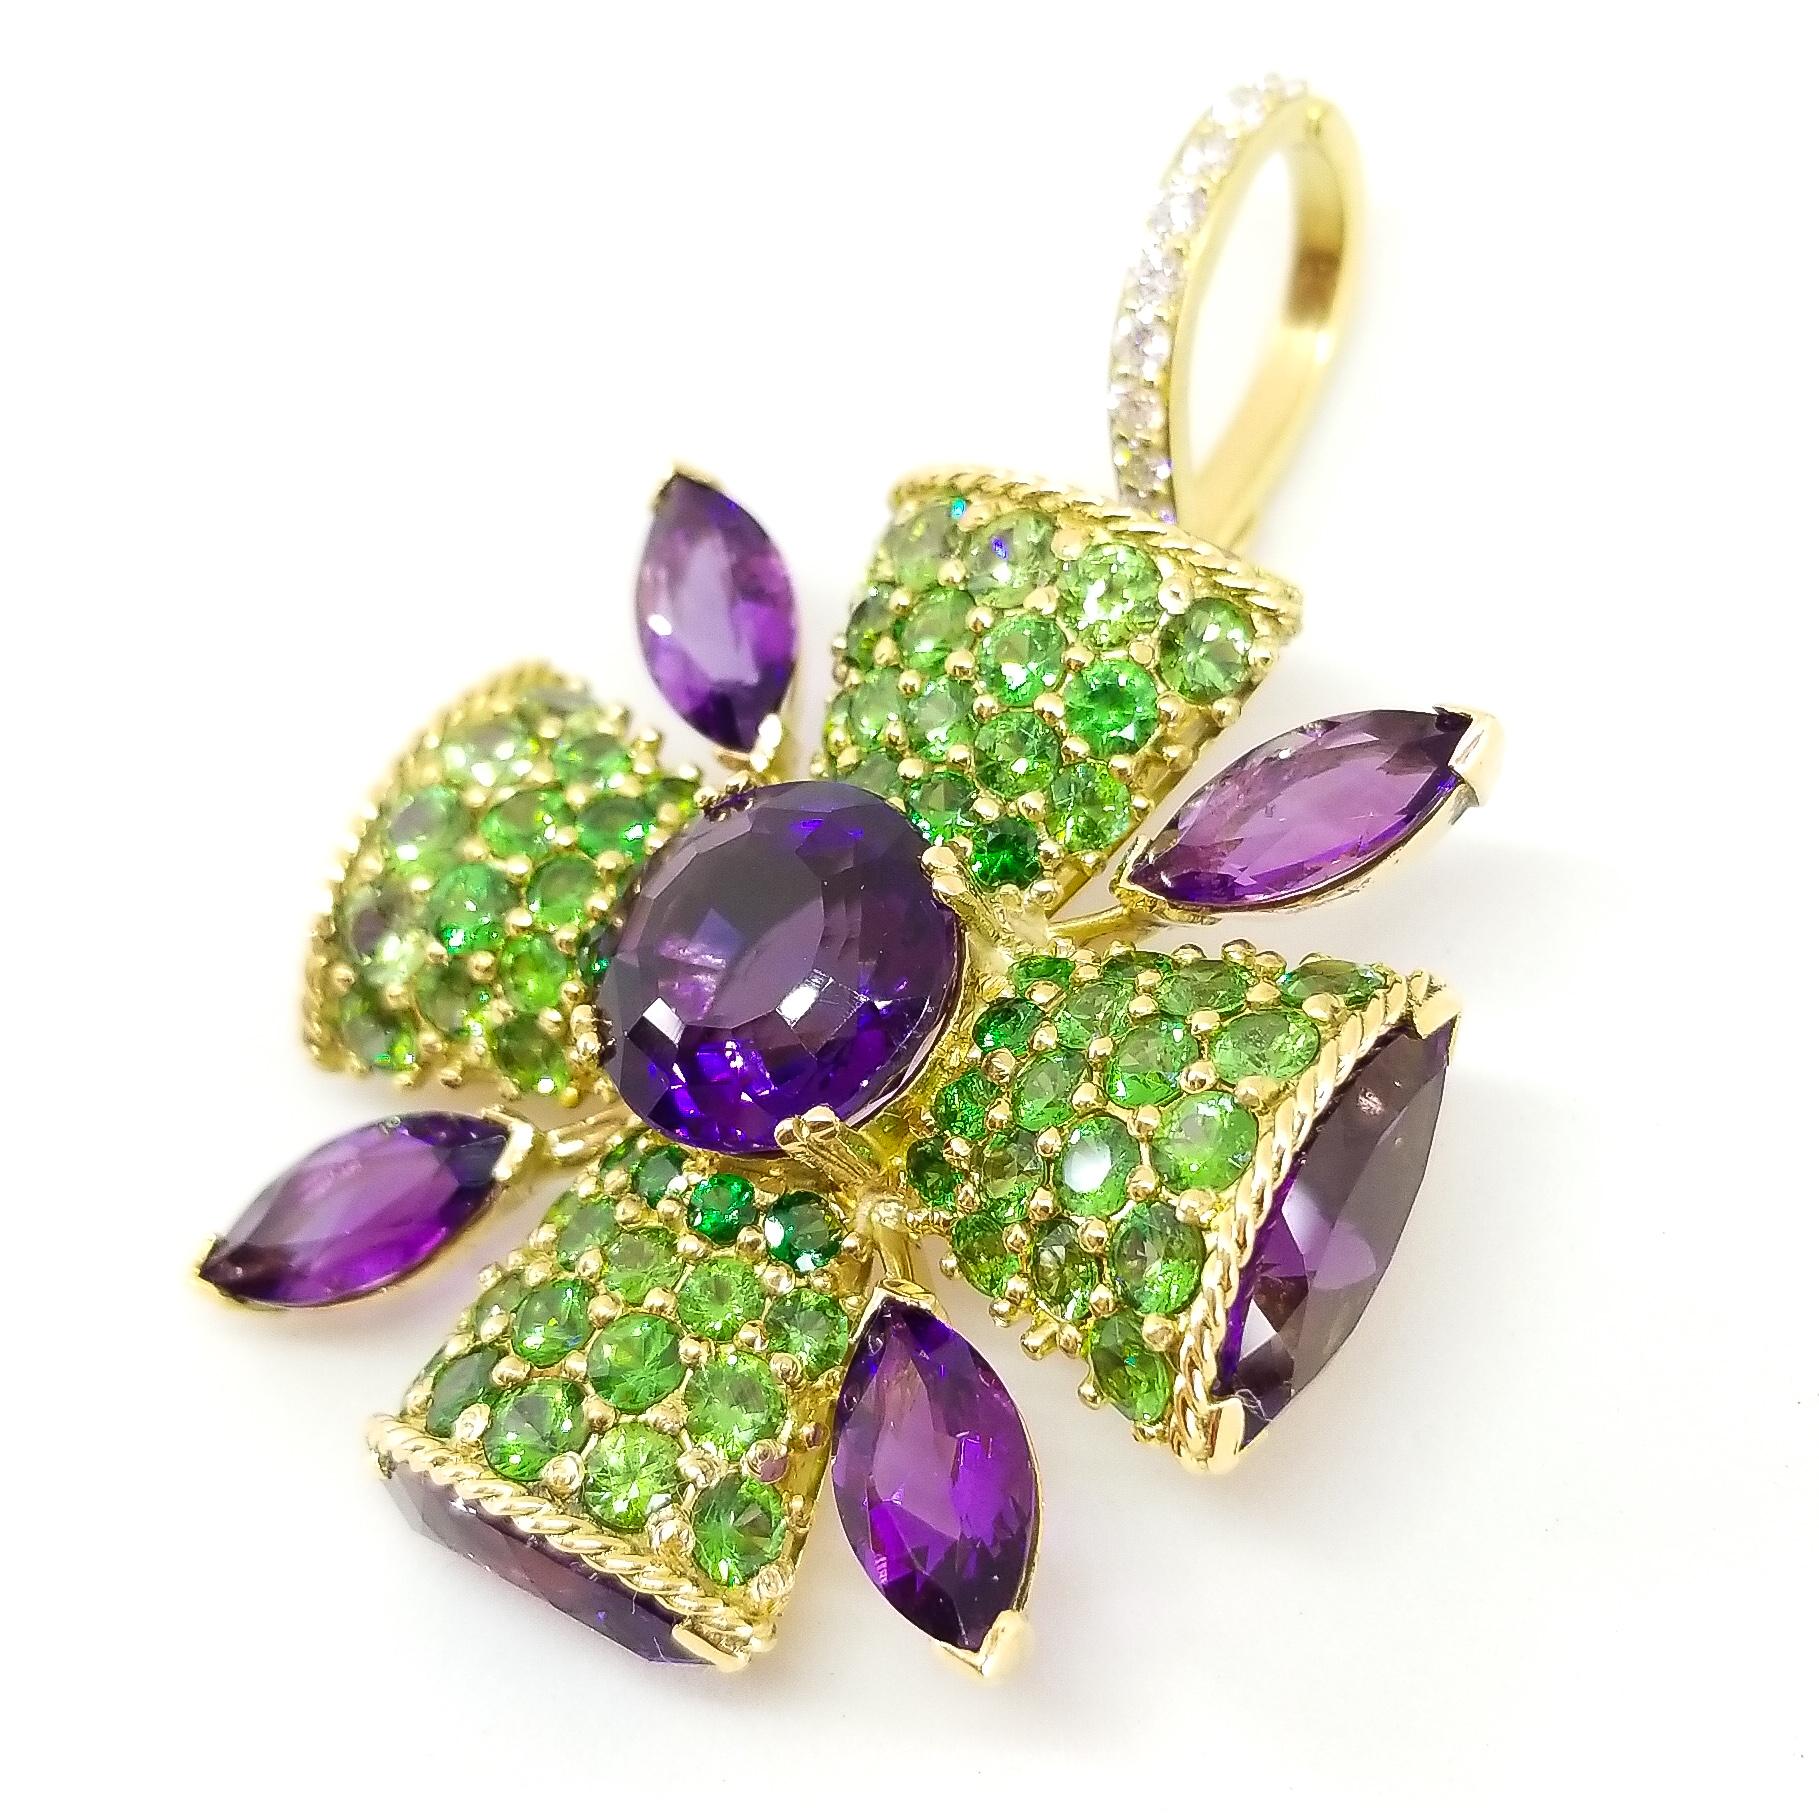 This Custom Designed and Crafted, One of a Kind Statement Enhancer Pendant by Artisan Tom Castor features Brilliant Contrasting Color and a Large Presence in the Classic Maltese Cross Style. Set in the center of the Cross is a large, Round Amethyst